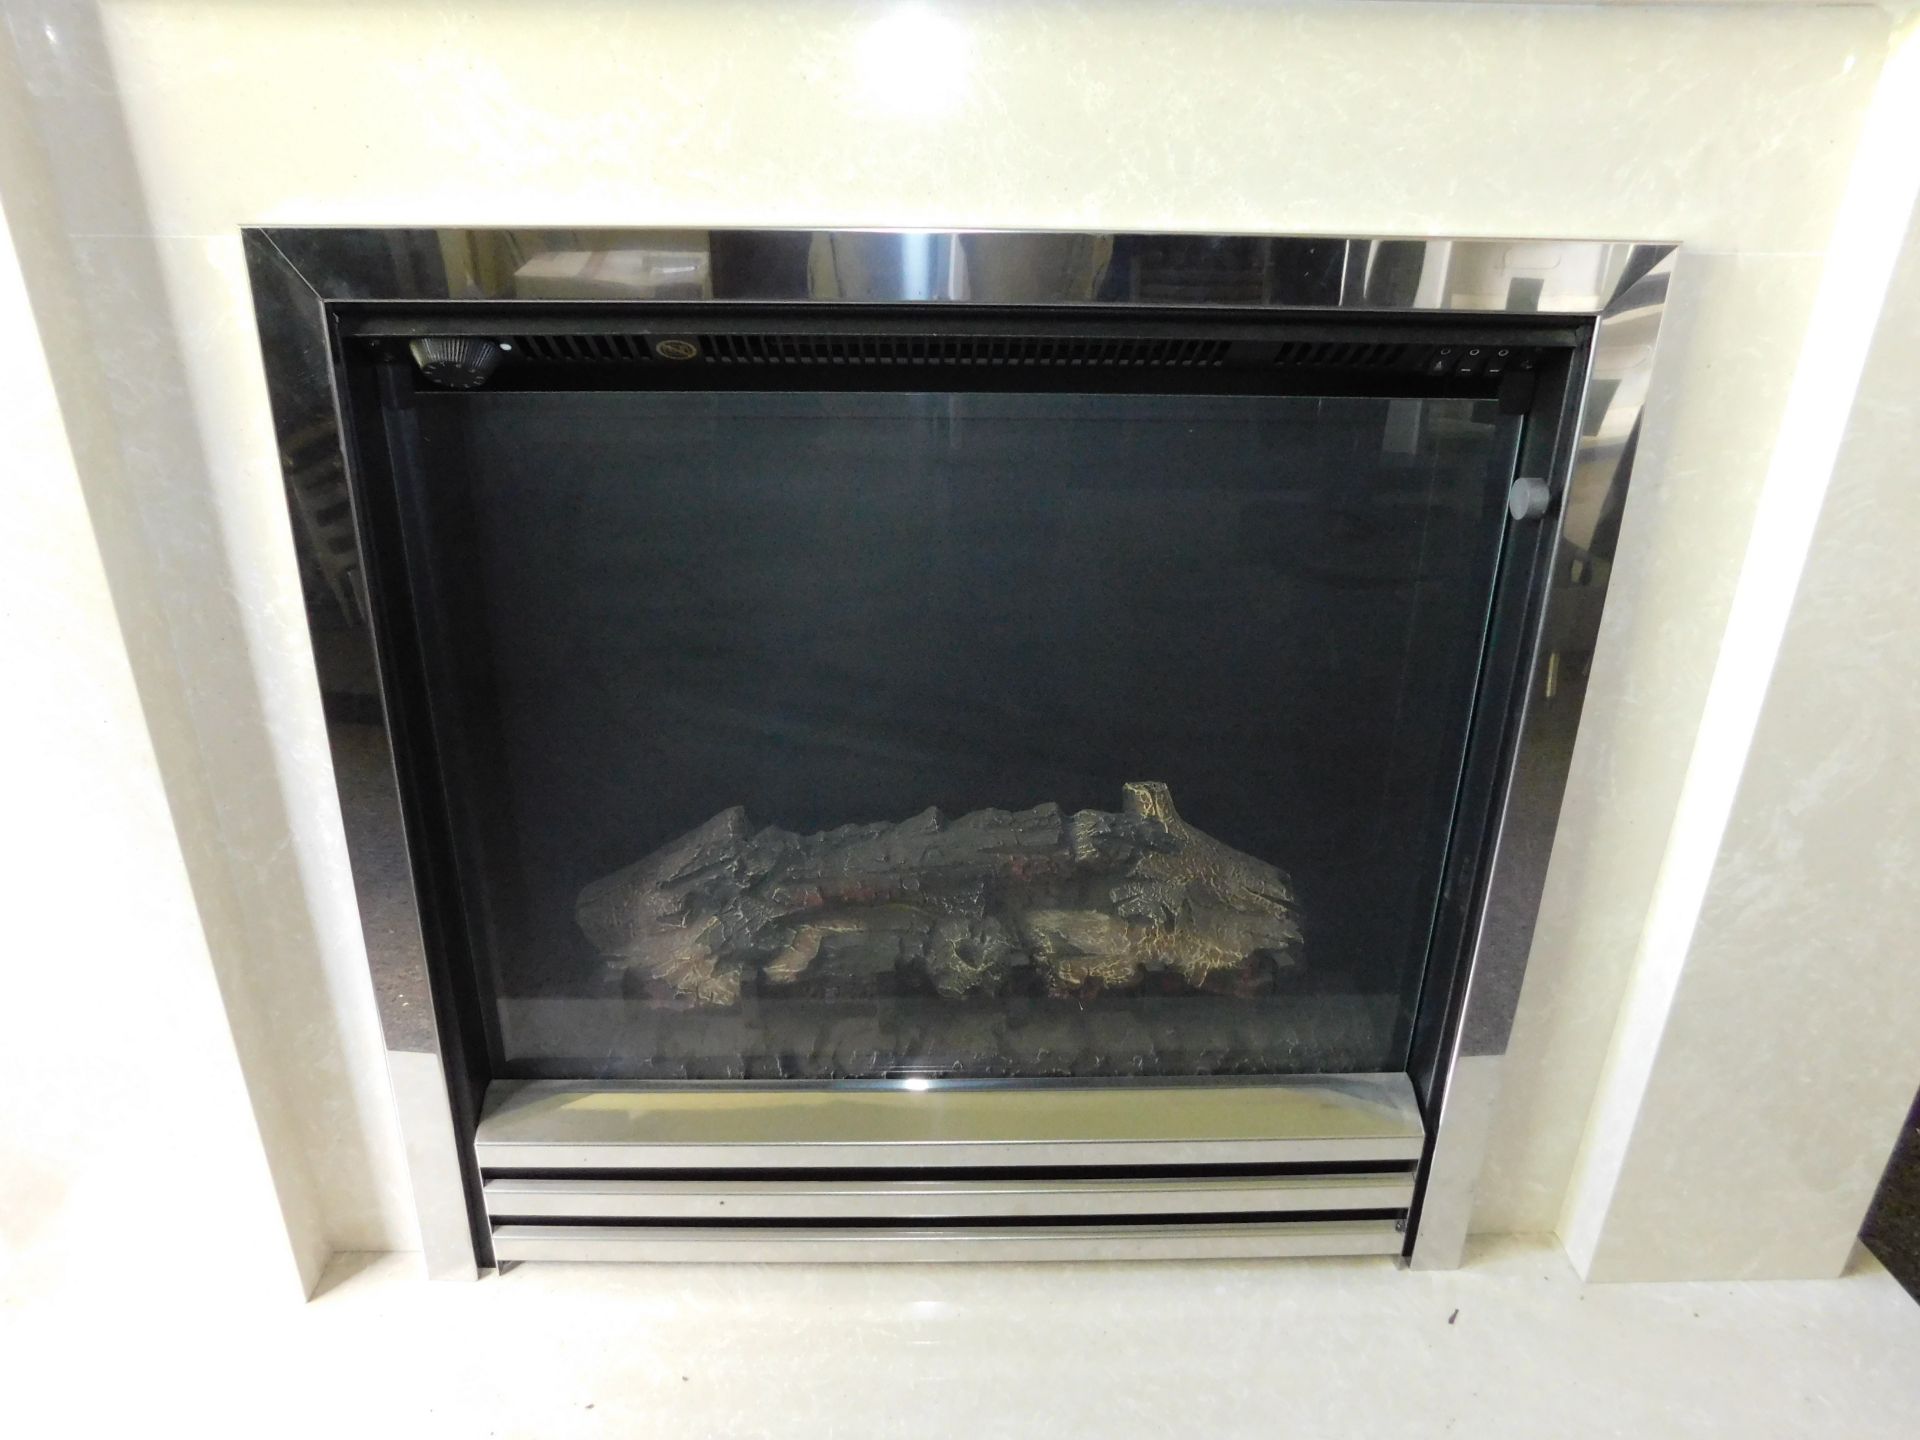 Ex-Display Elgin & Hall 46” “Cotesmore” Suite with Inset Electric Fire (Where the company’s - Image 2 of 3